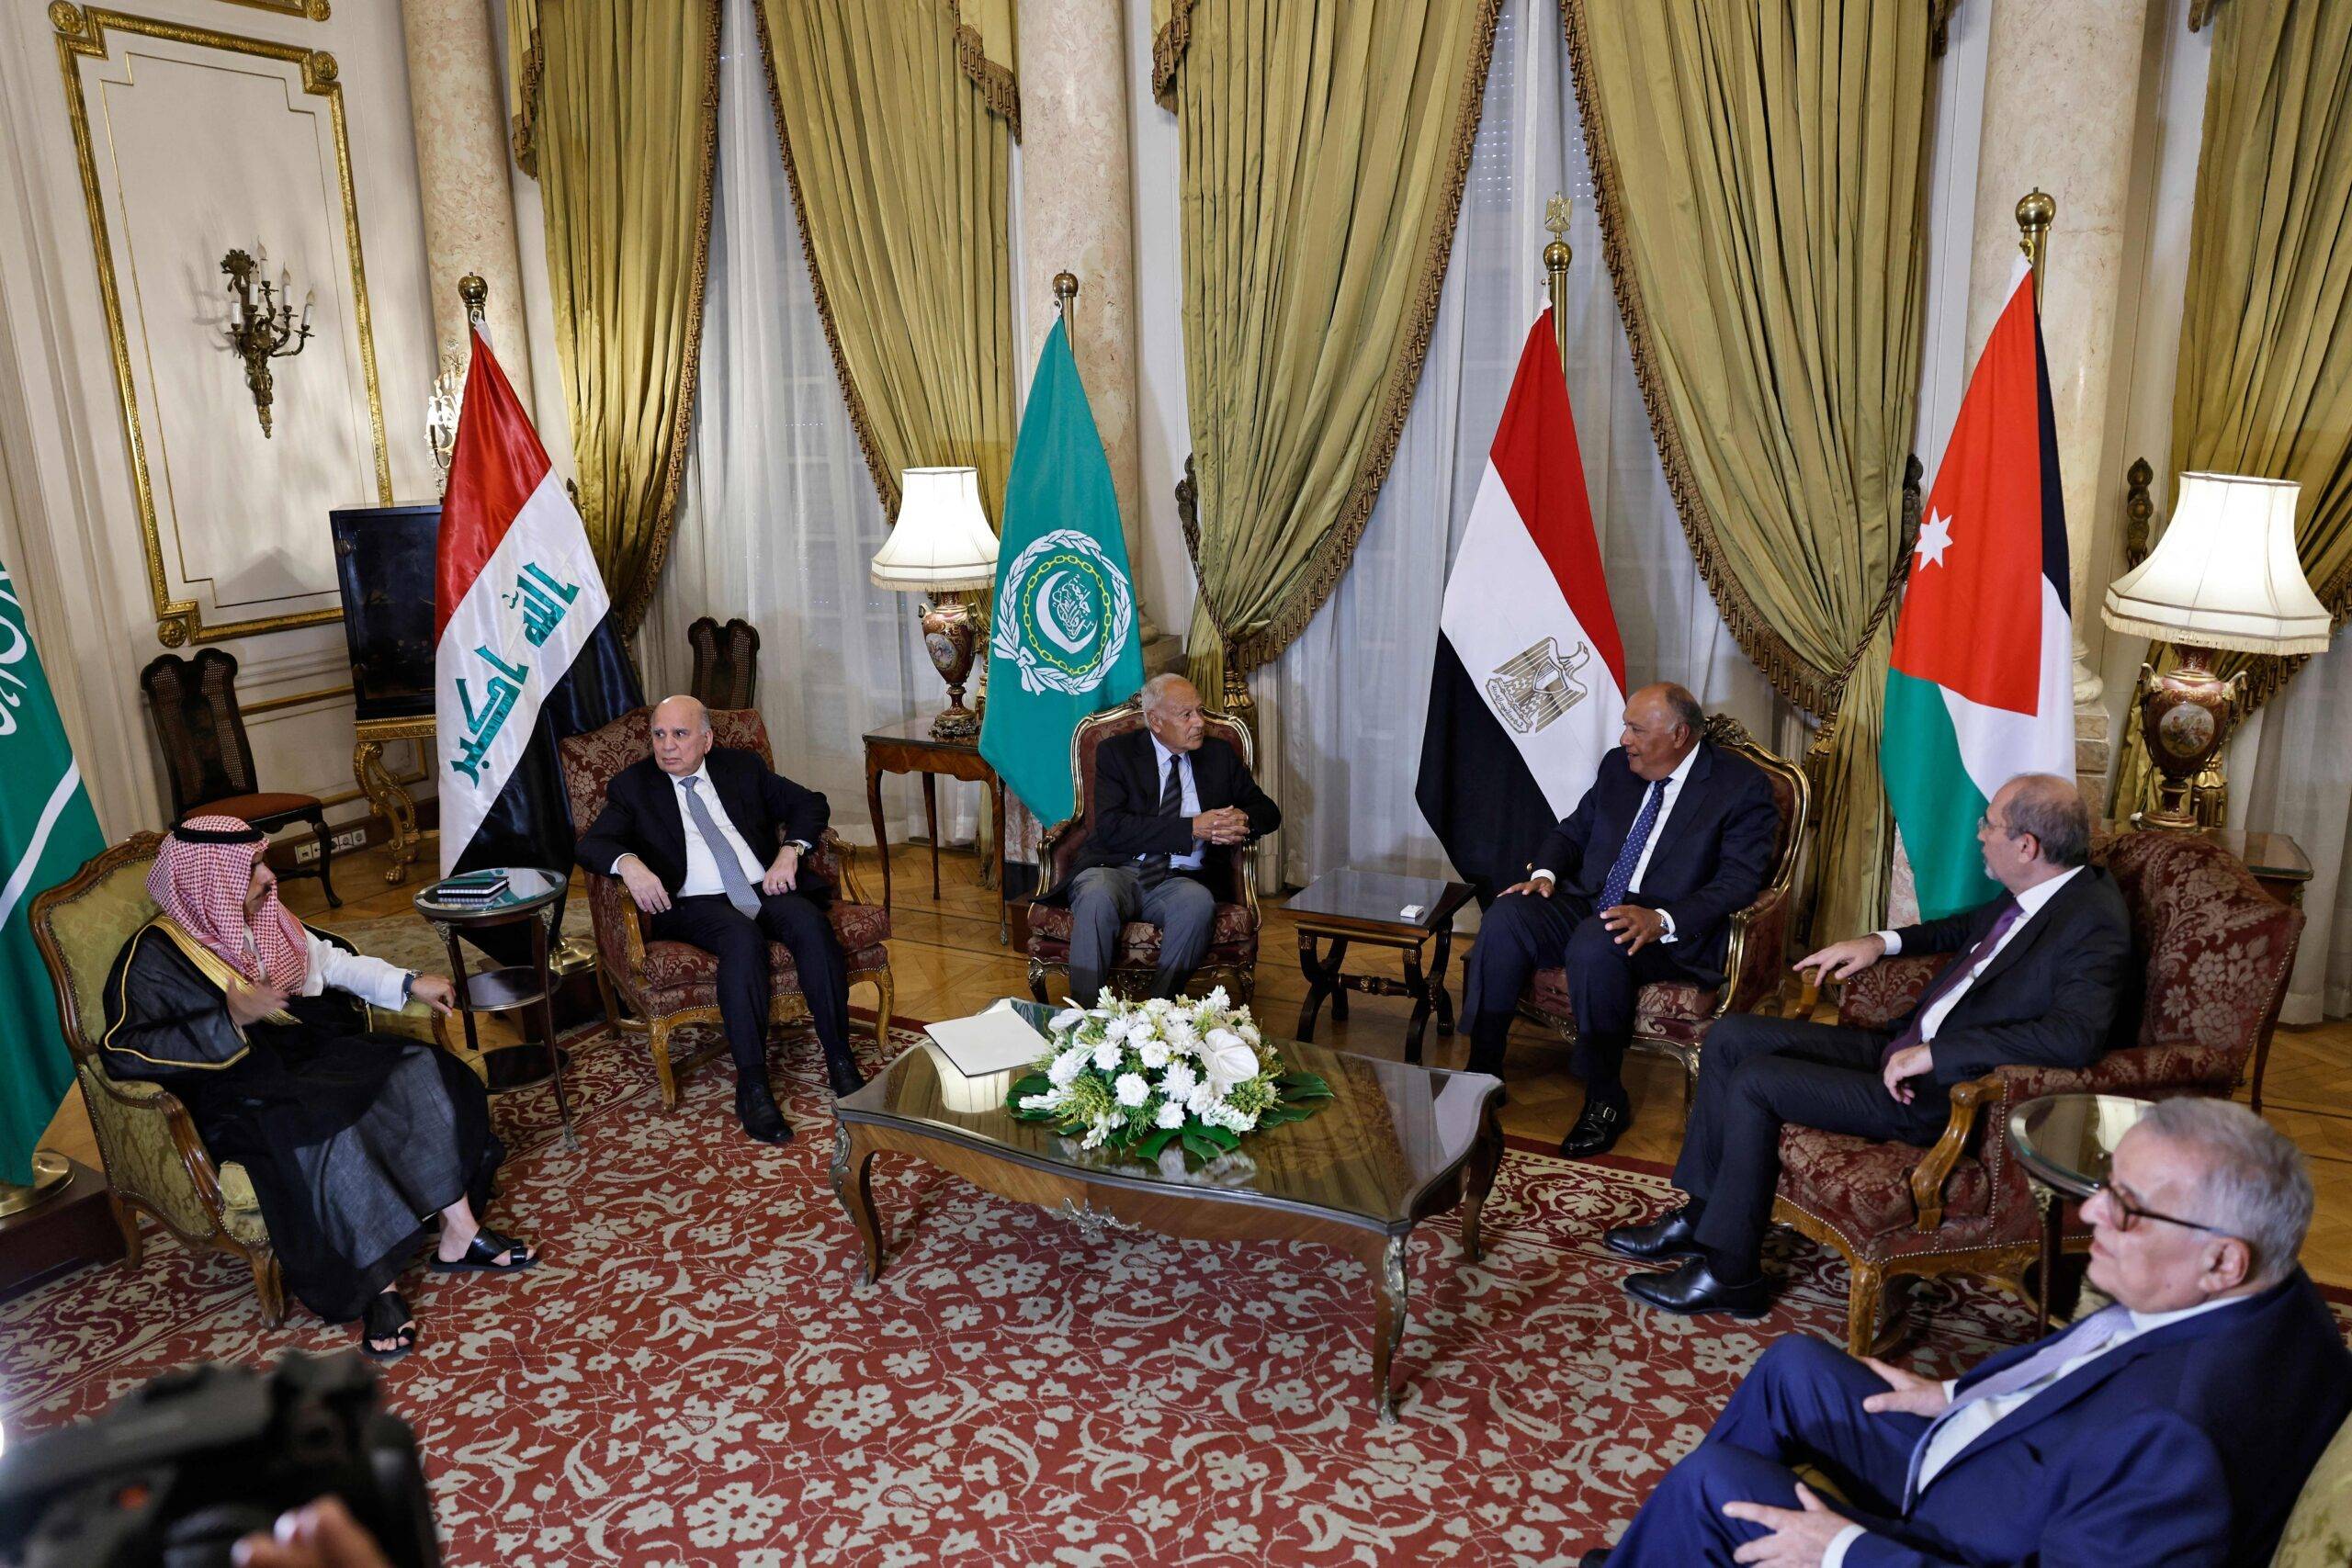 Members of the Arab committee of Syria, Egypt's Foreign Minister Sameh Shoukry (C-R), Arab League Secretary-General Ahmed Aboul Gheit, (C-L), Iraqi Foreign Minister Fuad Hussein (2-L), Saudi Minister of Foreign Affairs Faisal bin Farhan (L), Jordanian Foreign Minister Ayman Safadi (2-R) and Lebanese Foreign Minister Abdallah Bou Habib meet in Cairo on August 15, 2023 [KHALED DESOUKI/AFP via Getty Images]